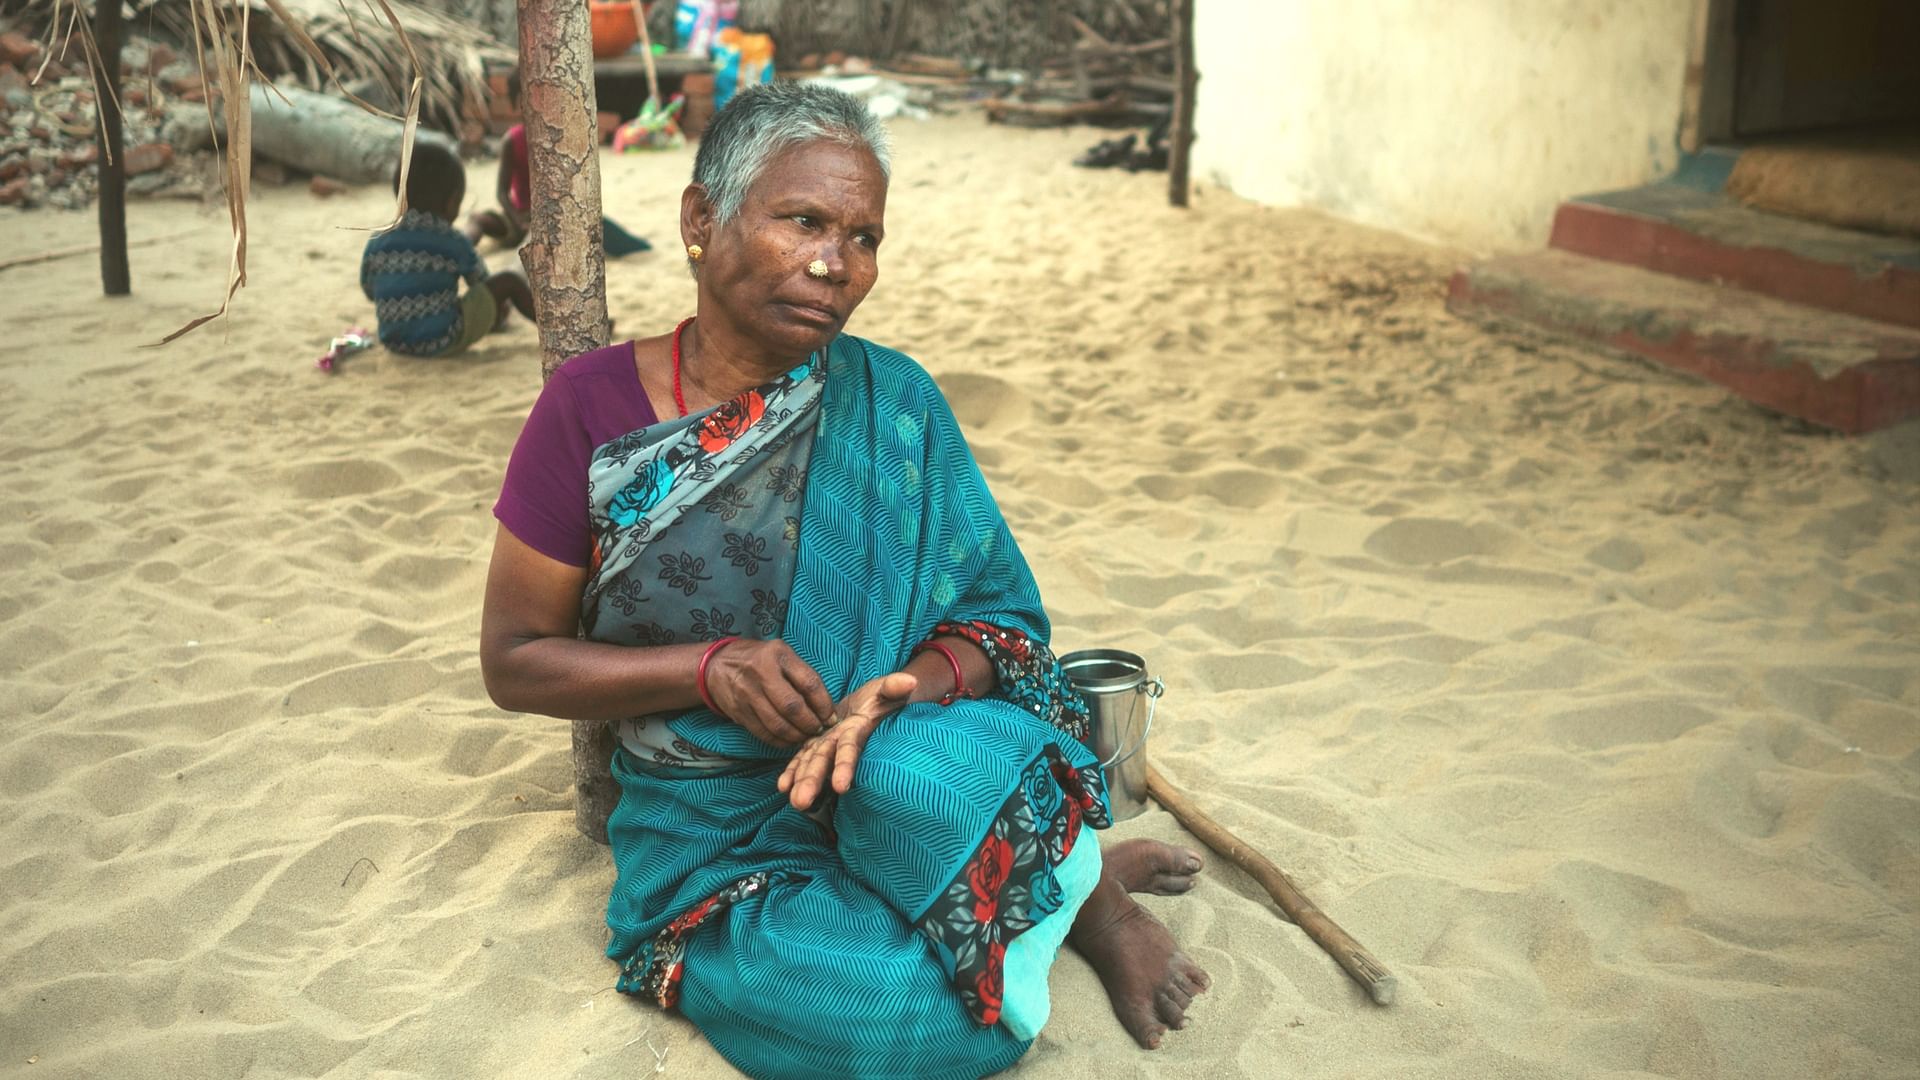 Muthukaraupayi, 52 was abandoned by her husband 24 years ago for another woman without any legal divorce or compensation. She has been working as a fisherwoman to support her two daughters.